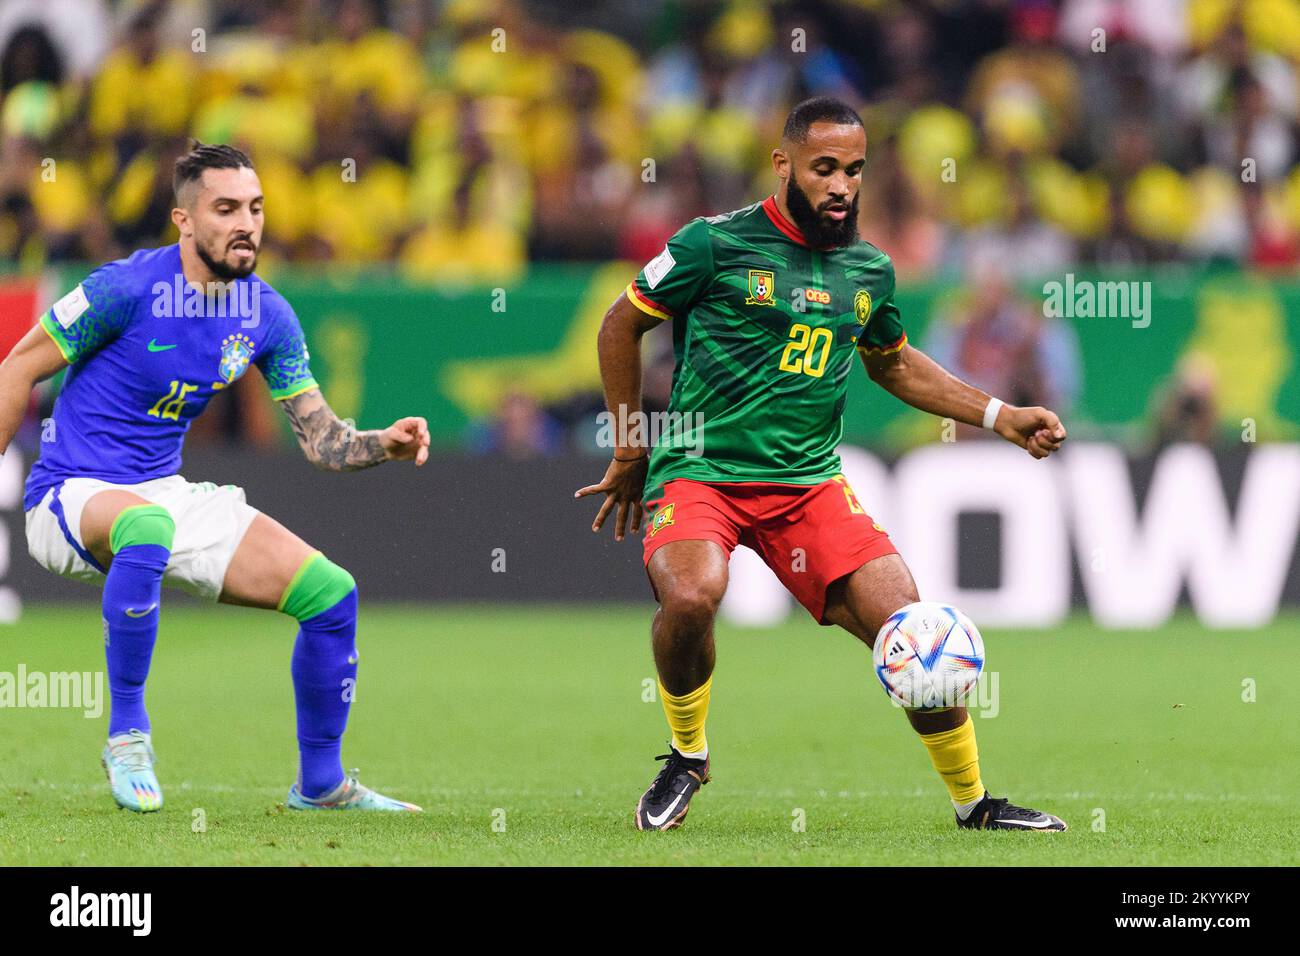 Lusail, Qatar. 02nd Dec, 2022. Lusail National Stadium Bryan Mbeumo of Cameroon during a match between Cameroon and Brazil, valid for the group stage of the World Cup, held at the Lusail National Stadium in Lusail, Qatar. (Marcio Machado/SPP) Credit: SPP Sport Press Photo. /Alamy Live News Stock Photo